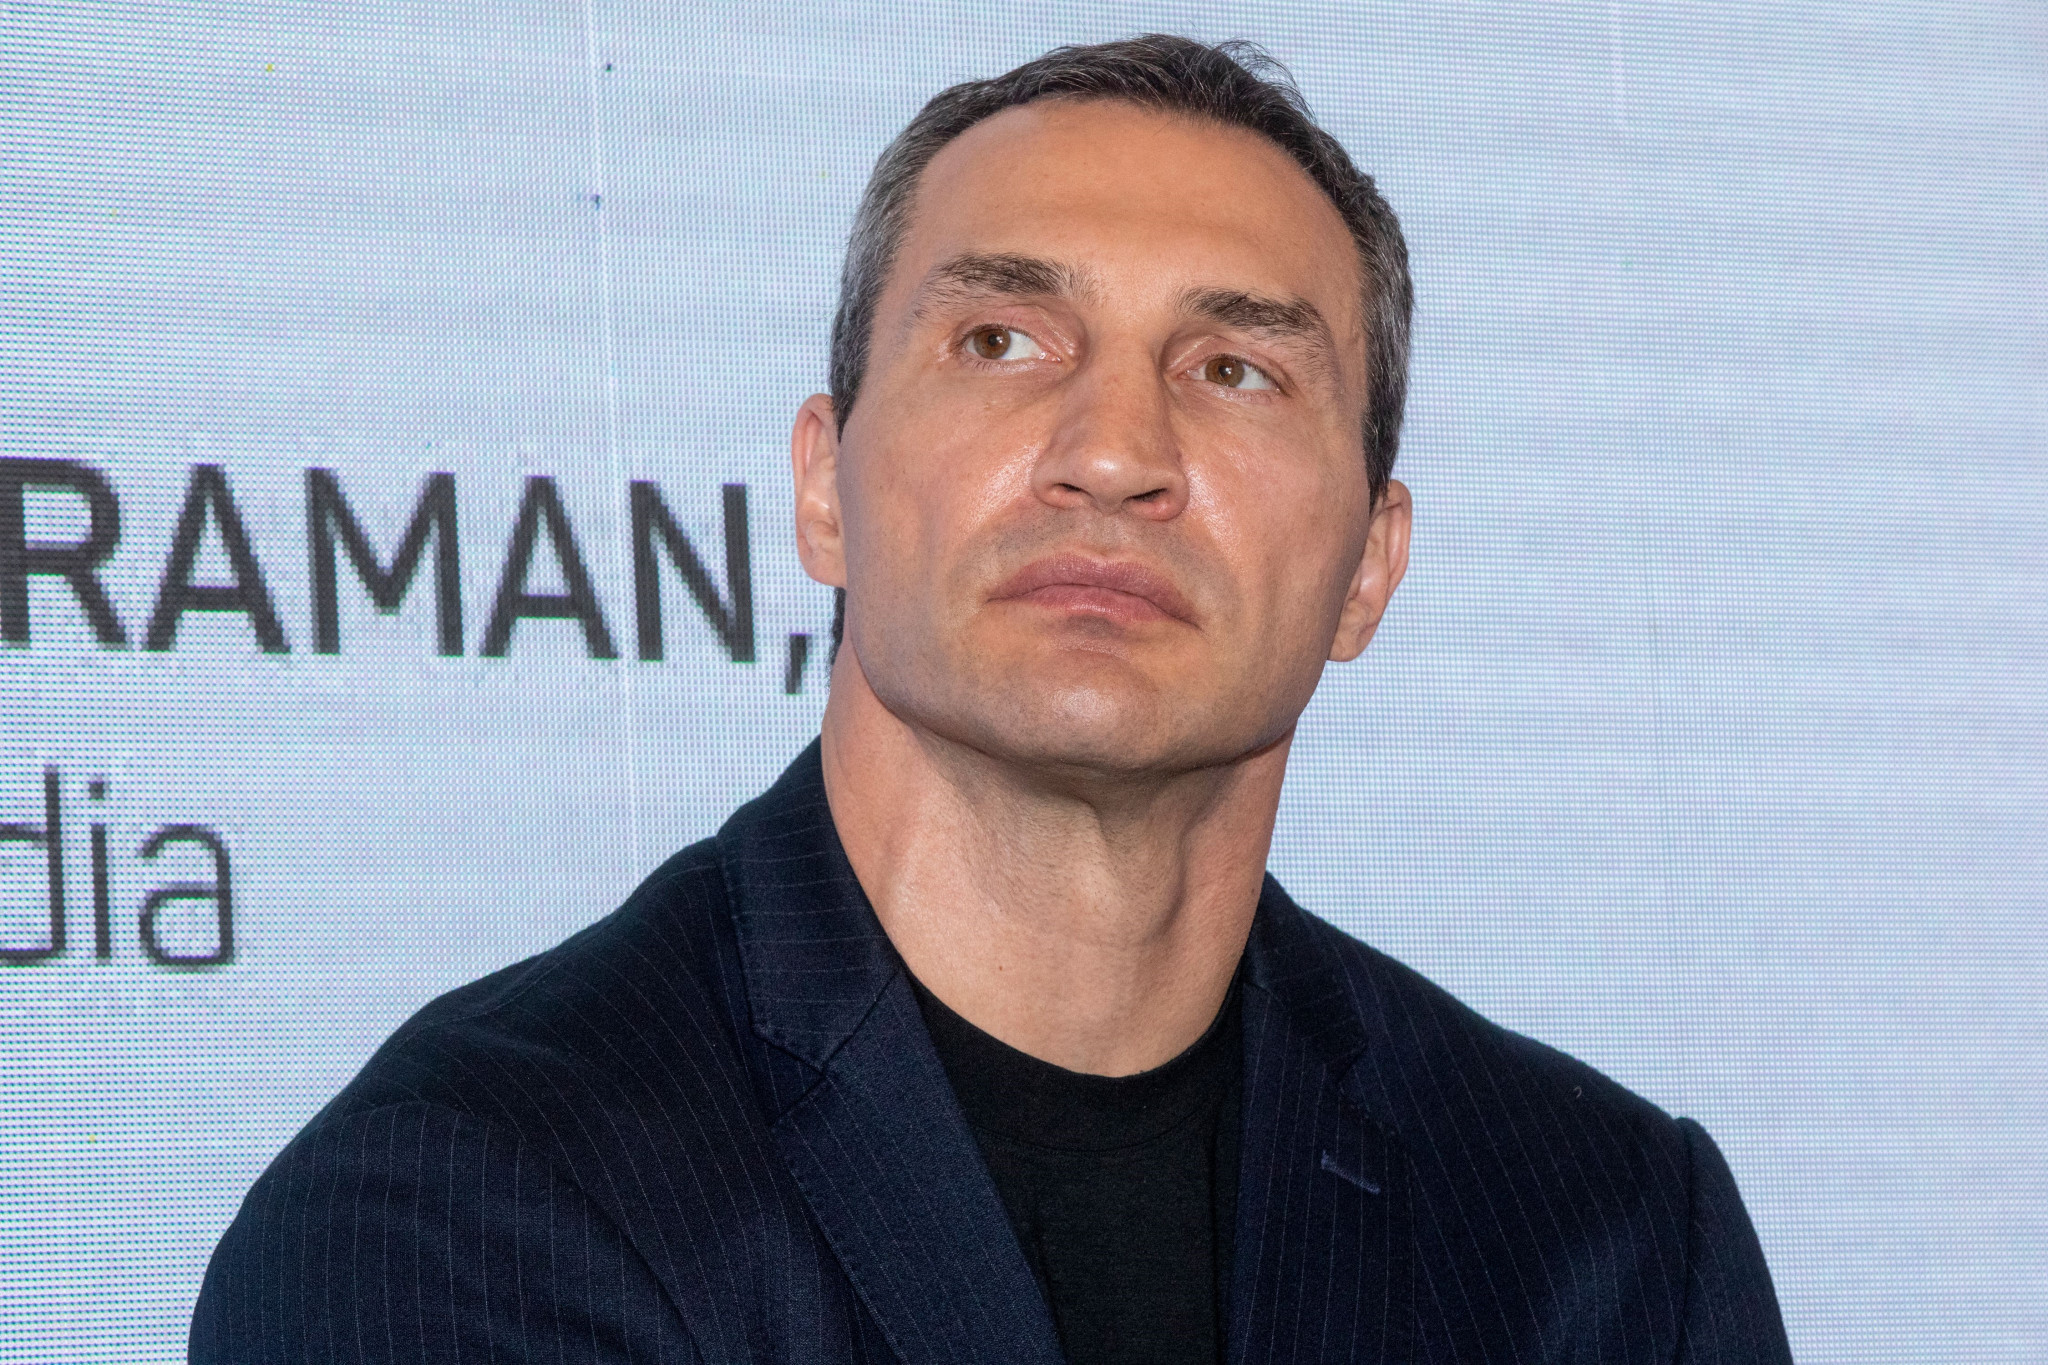 Wladimir Klitschko claims IOC President Thomas Bach "represents Russian interests rather than Olympic values" and "cannot stand under a white flag" ©Getty Images